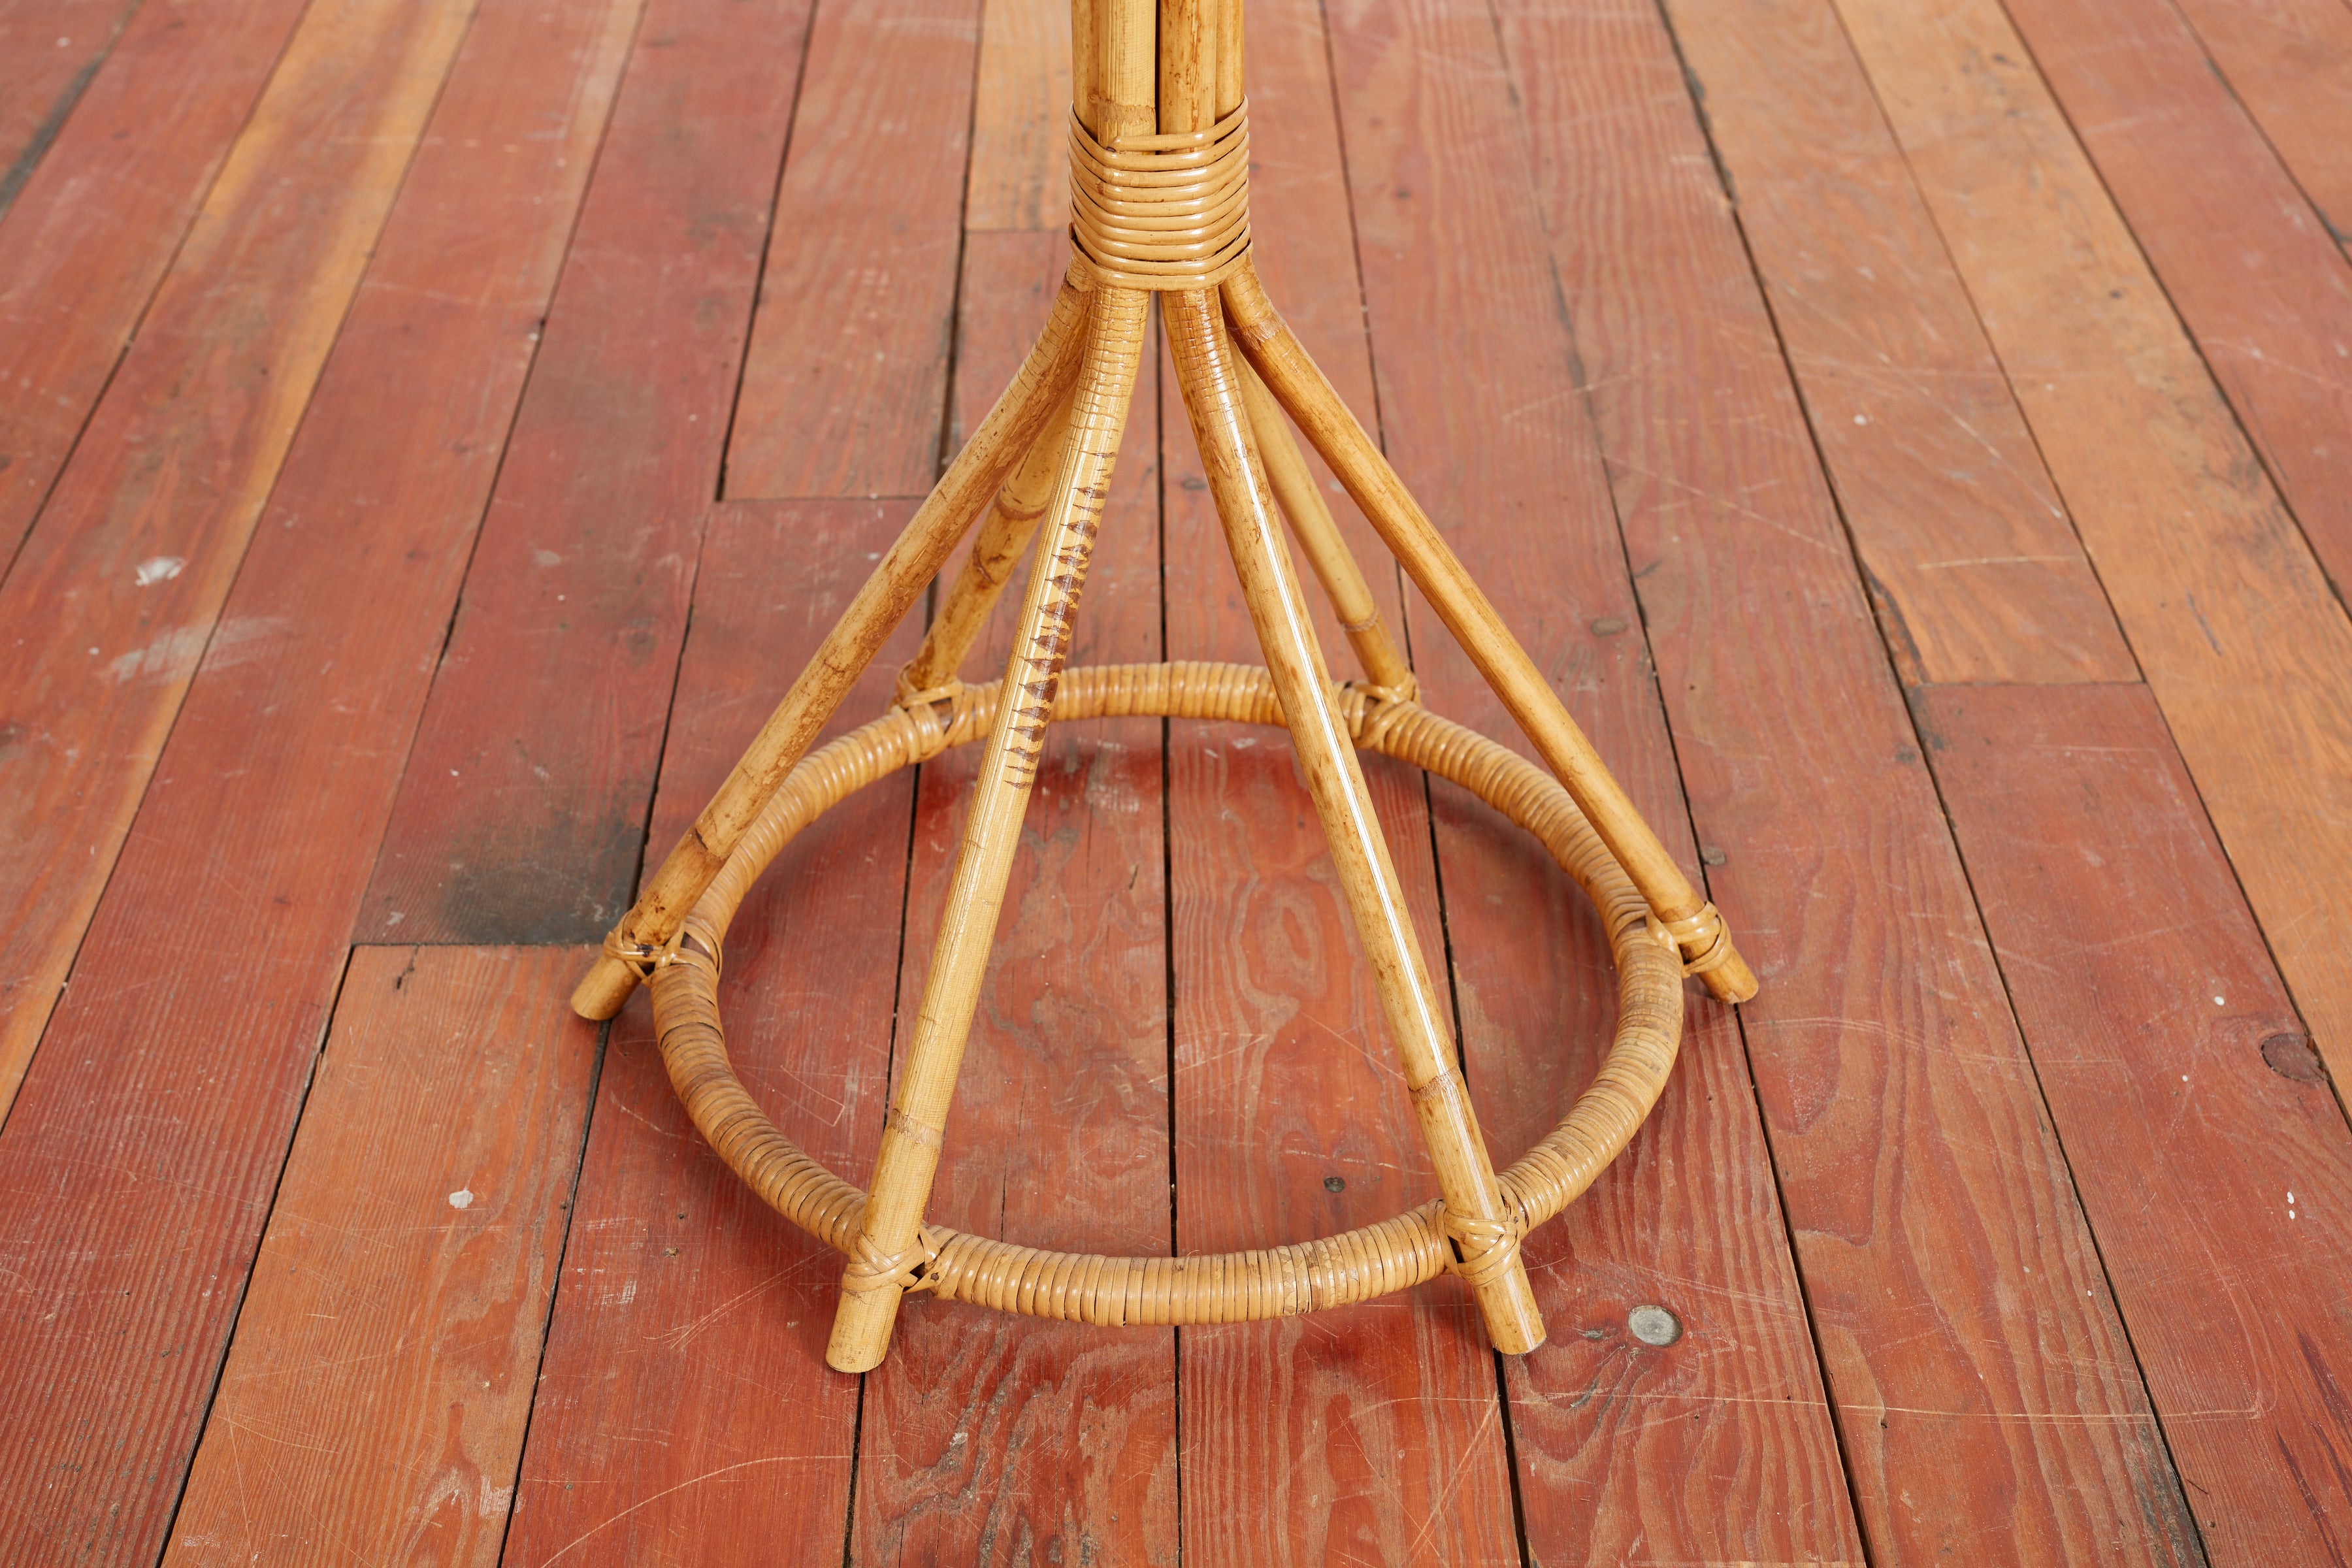 Mid-Century Bamboo Rope and Leather Plant Holder, 1970s for sale at Pamono